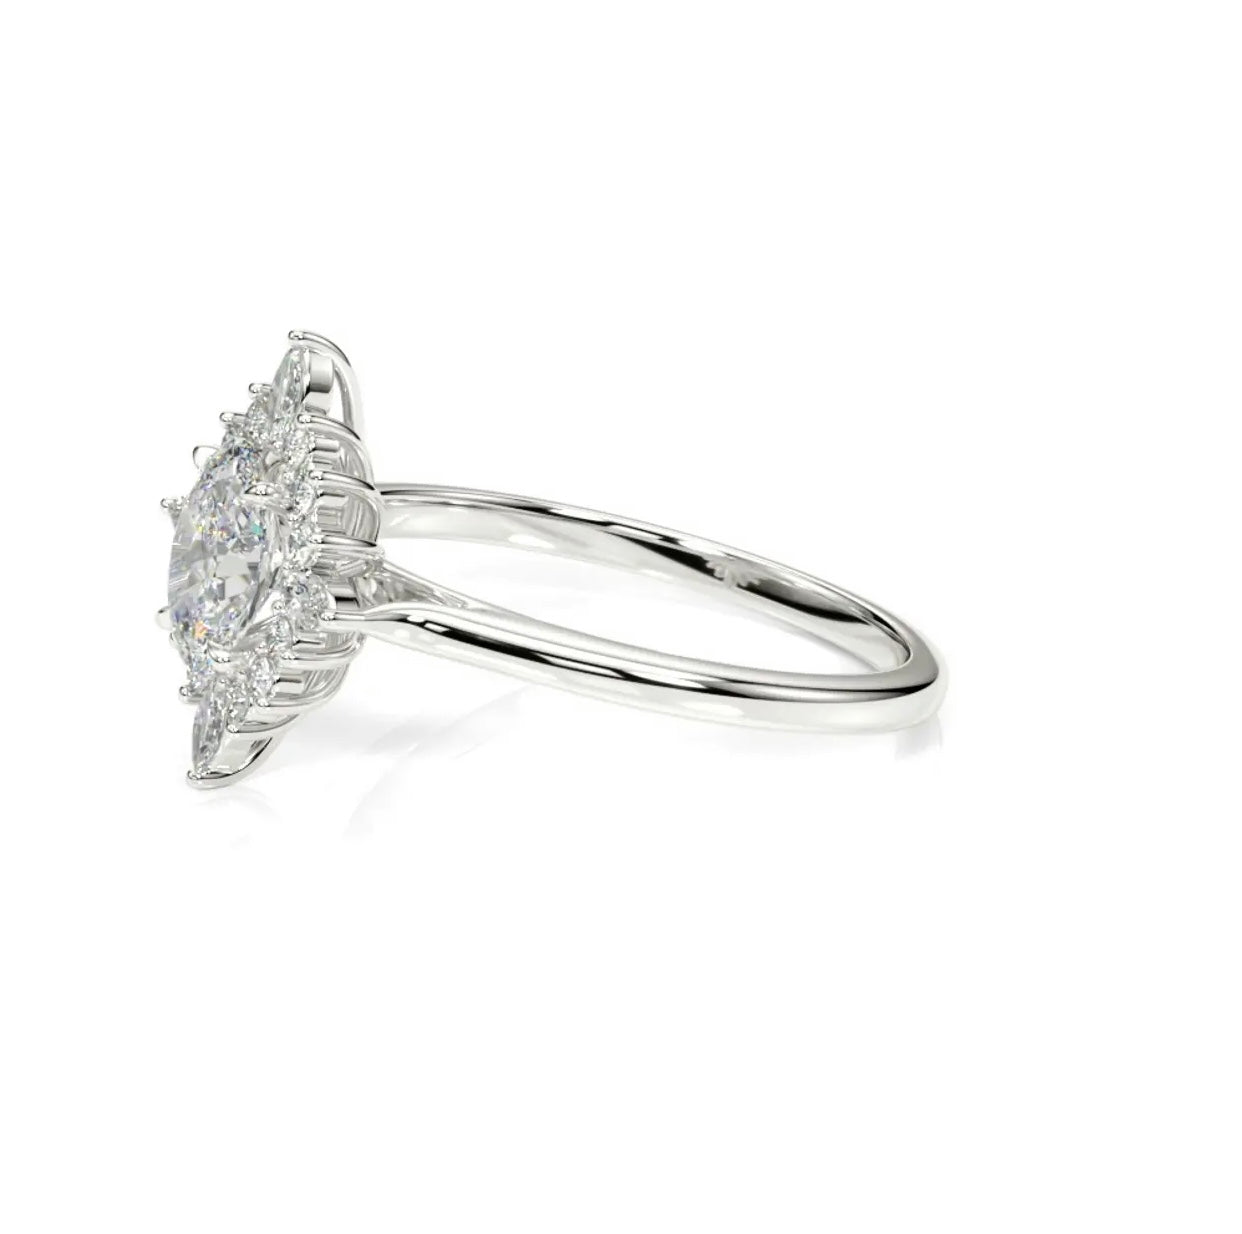 Oval Star Ring